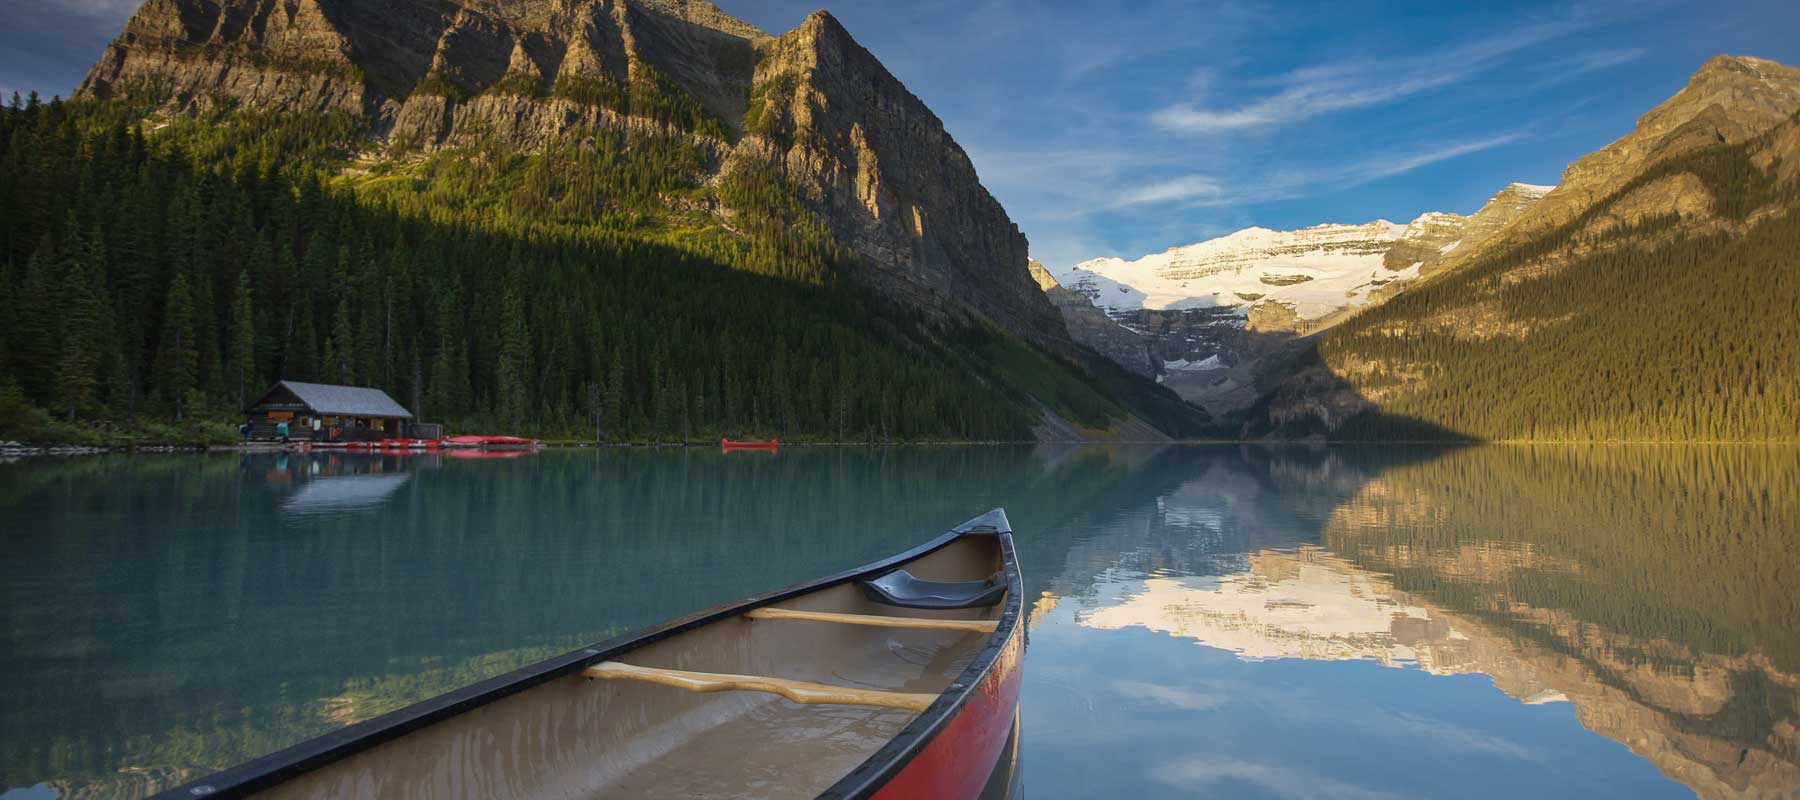 Best Lake Louise Vacations | Road Trips | Train Trips 